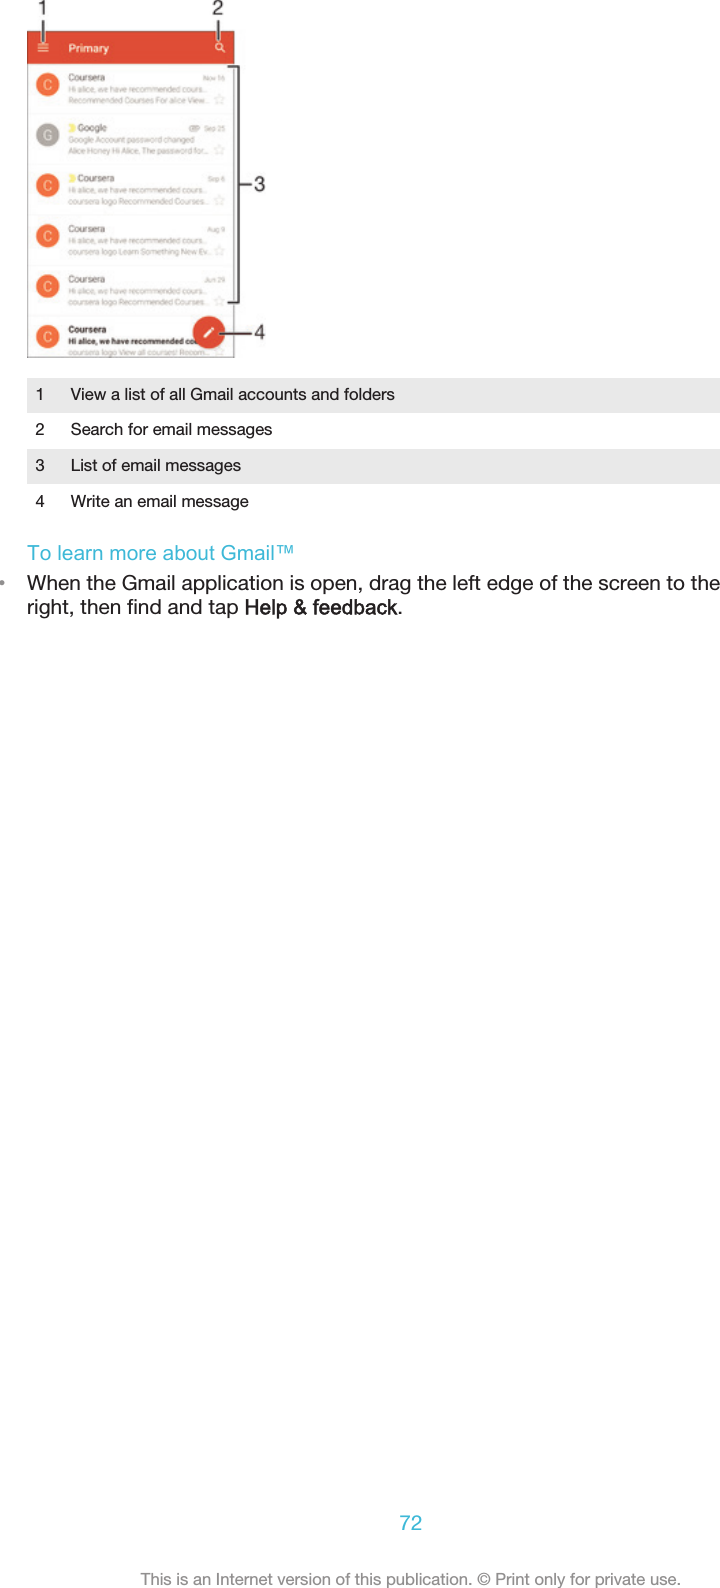 1 View a list of all Gmail accounts and folders2 Search for email messages3 List of email messages4 Write an email messageTo learn more about Gmail™•When the Gmail application is open, drag the left edge of the screen to theright, then find and tap Help &amp; feedback.72This is an Internet version of this publication. © Print only for private use.